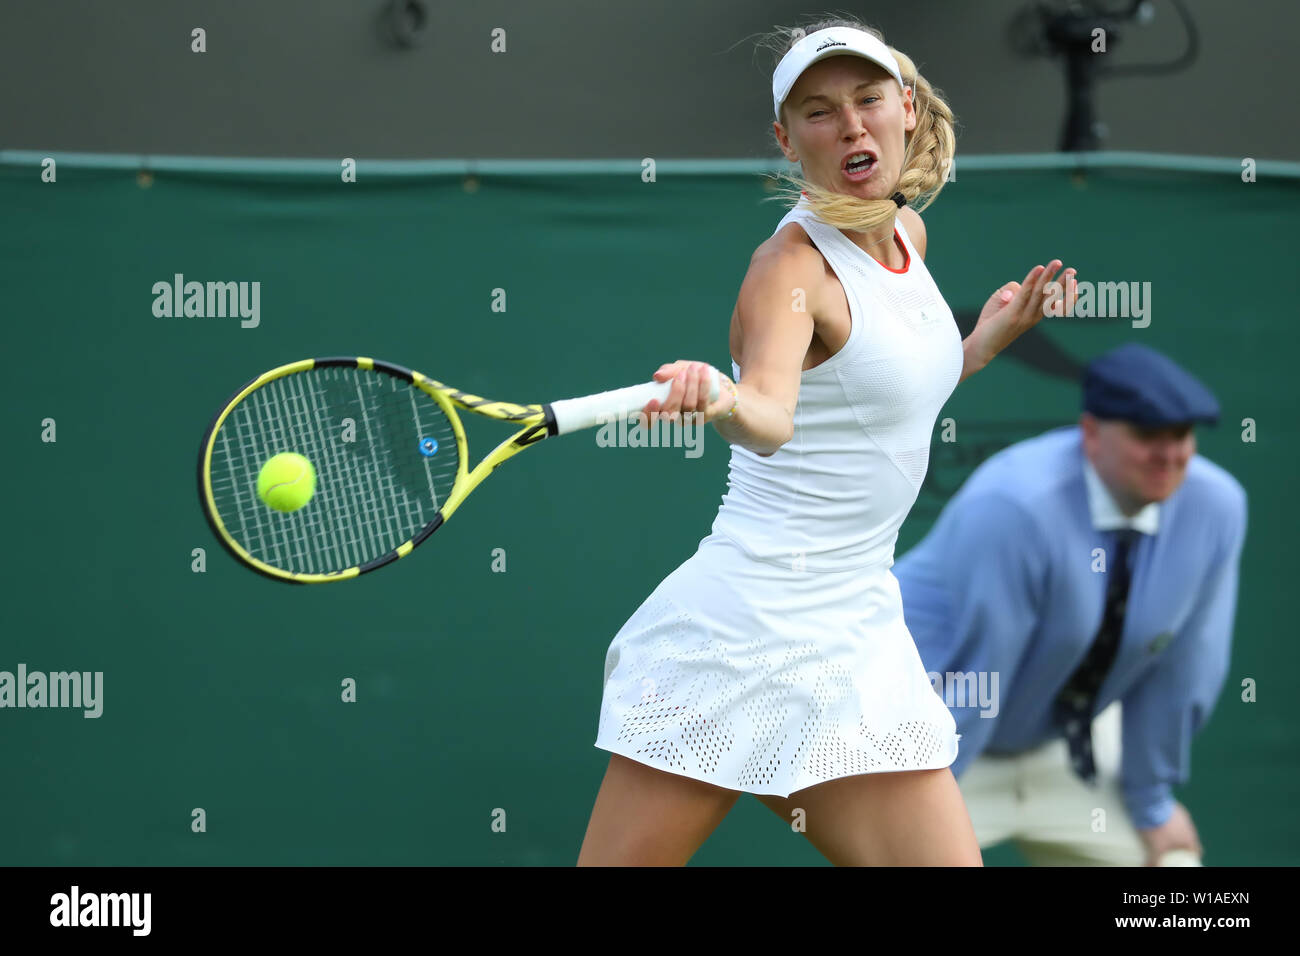 Stella mccartney tennis dress 2019 hi-res stock photography and images -  Alamy